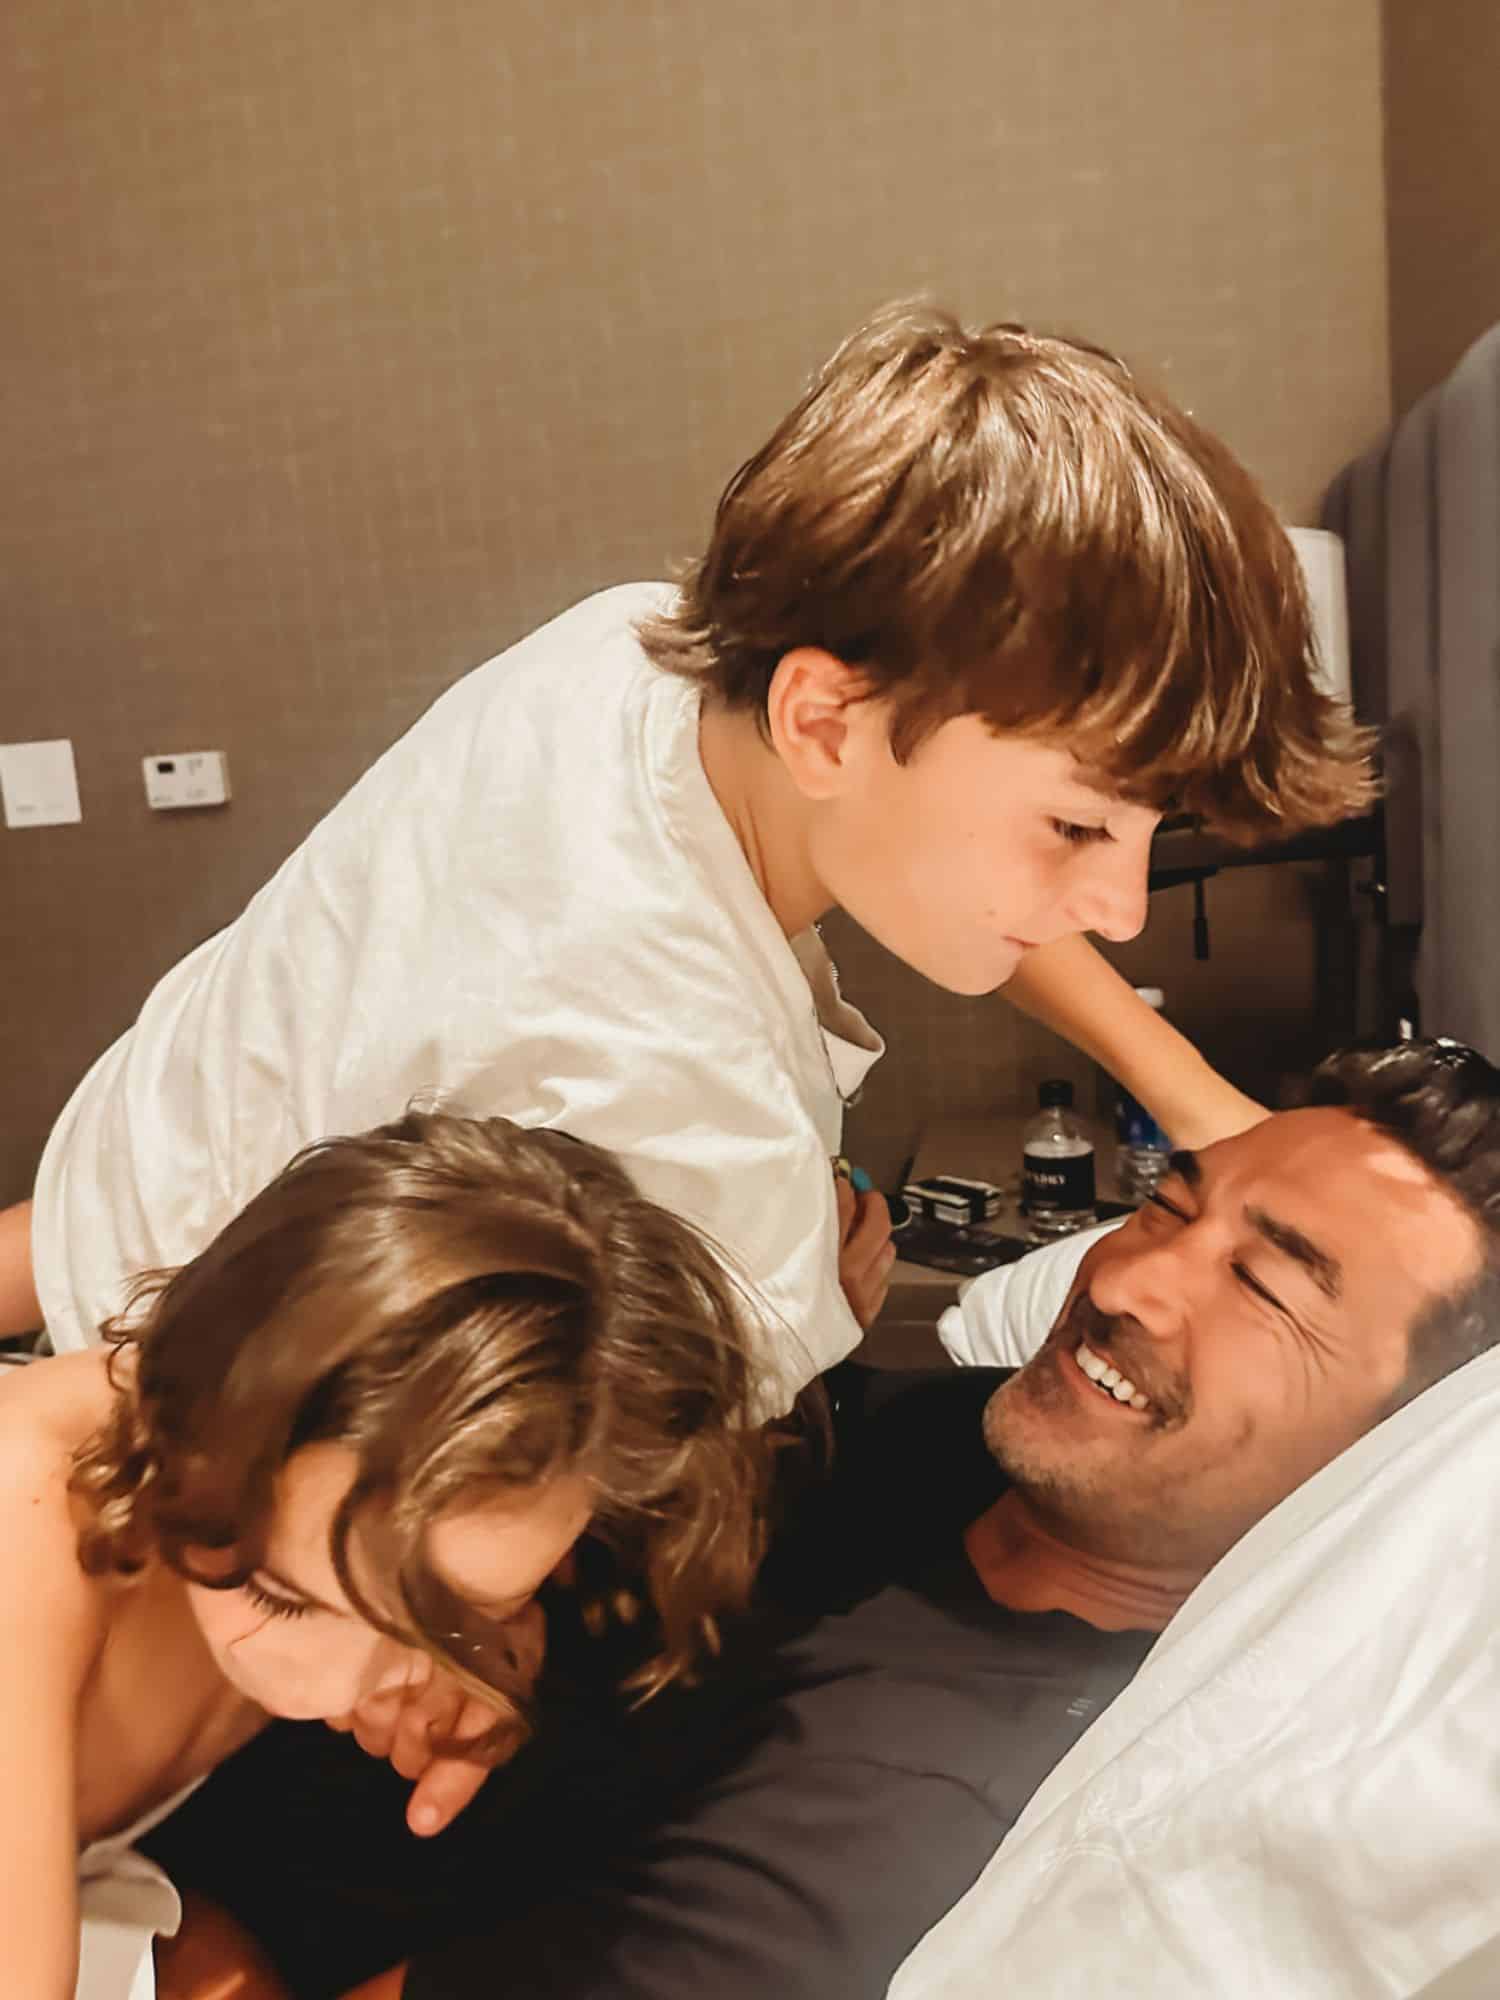 kids in bed with dad